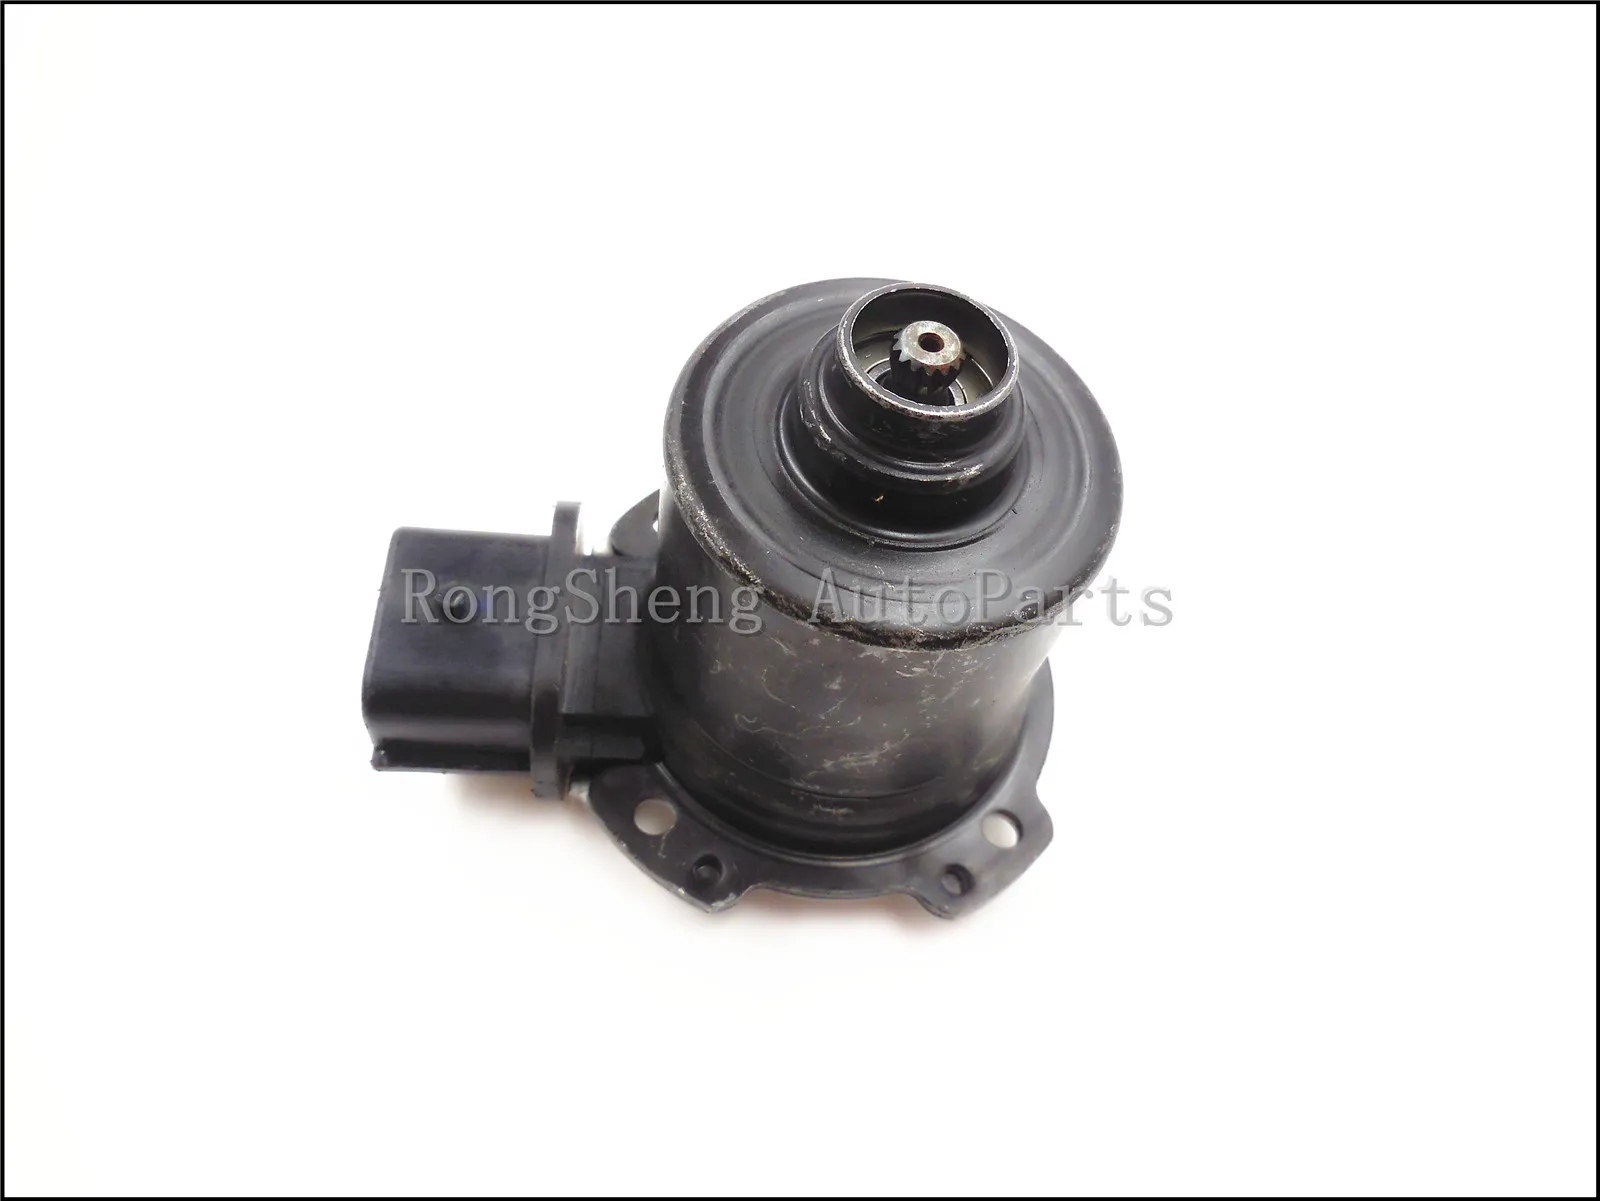 Automatic Transmission Clutch Actuator AE8Z7C604A For Ford Fiesta